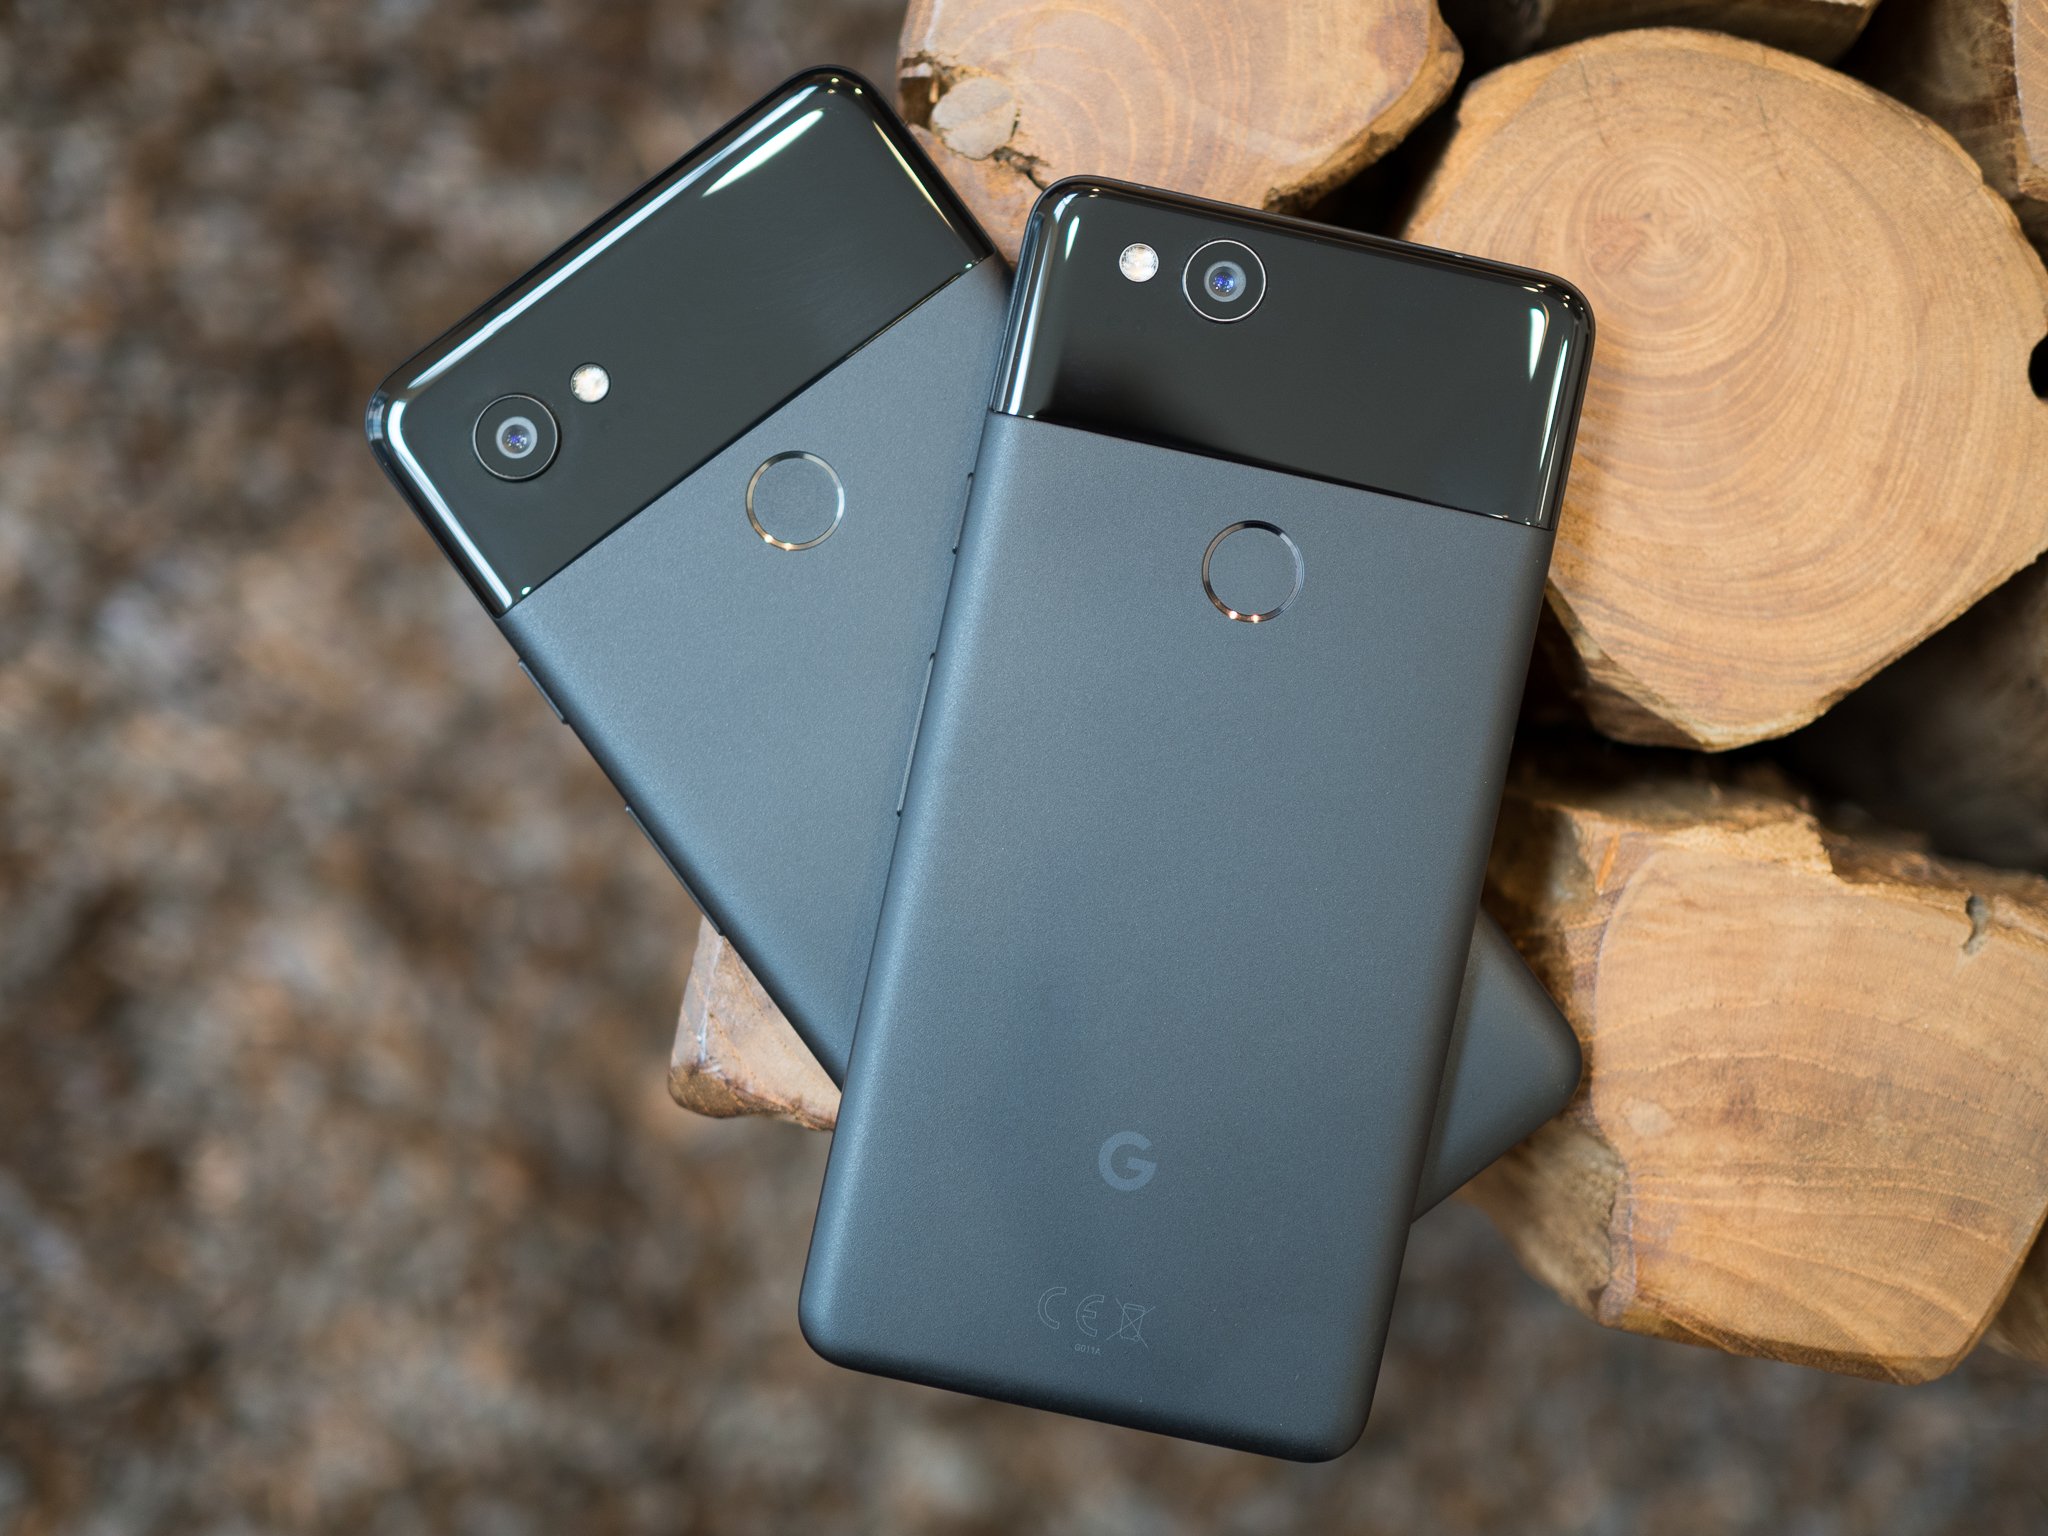 Google Pixel 2 and Pixel 2 XL review: The new standard for Android | Android Central